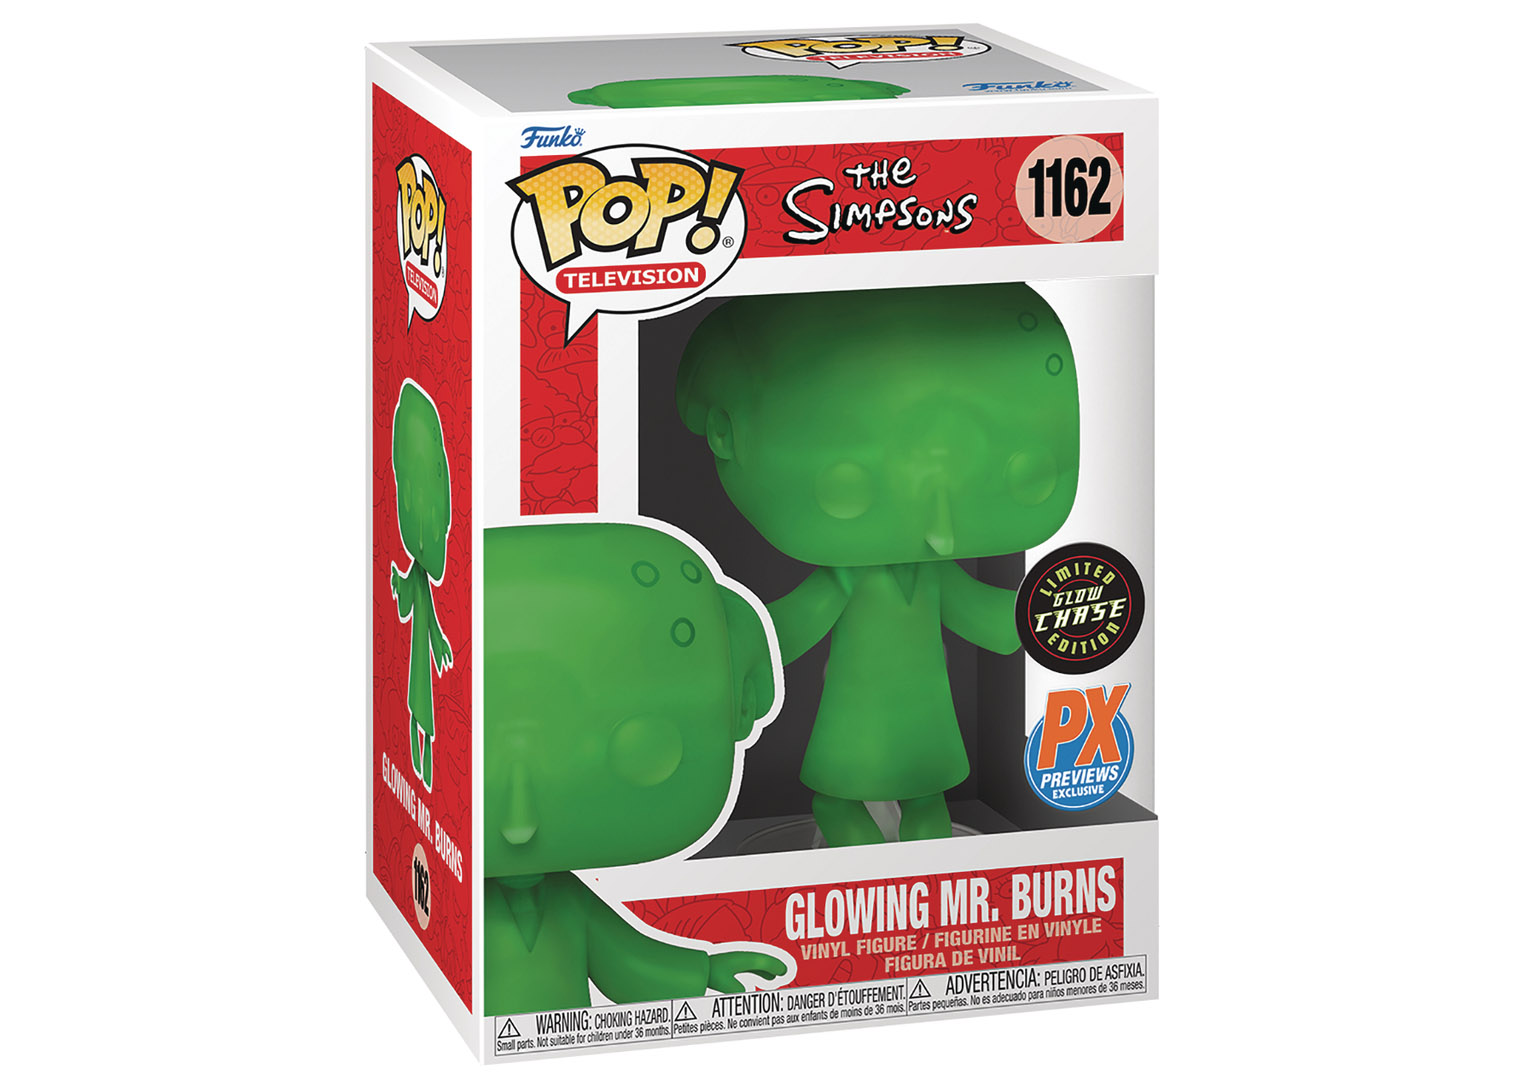 Funko Pop! Television The Simpsons Glowing Mr. Burns PX GITD Chase  Exclusive Figure #1162